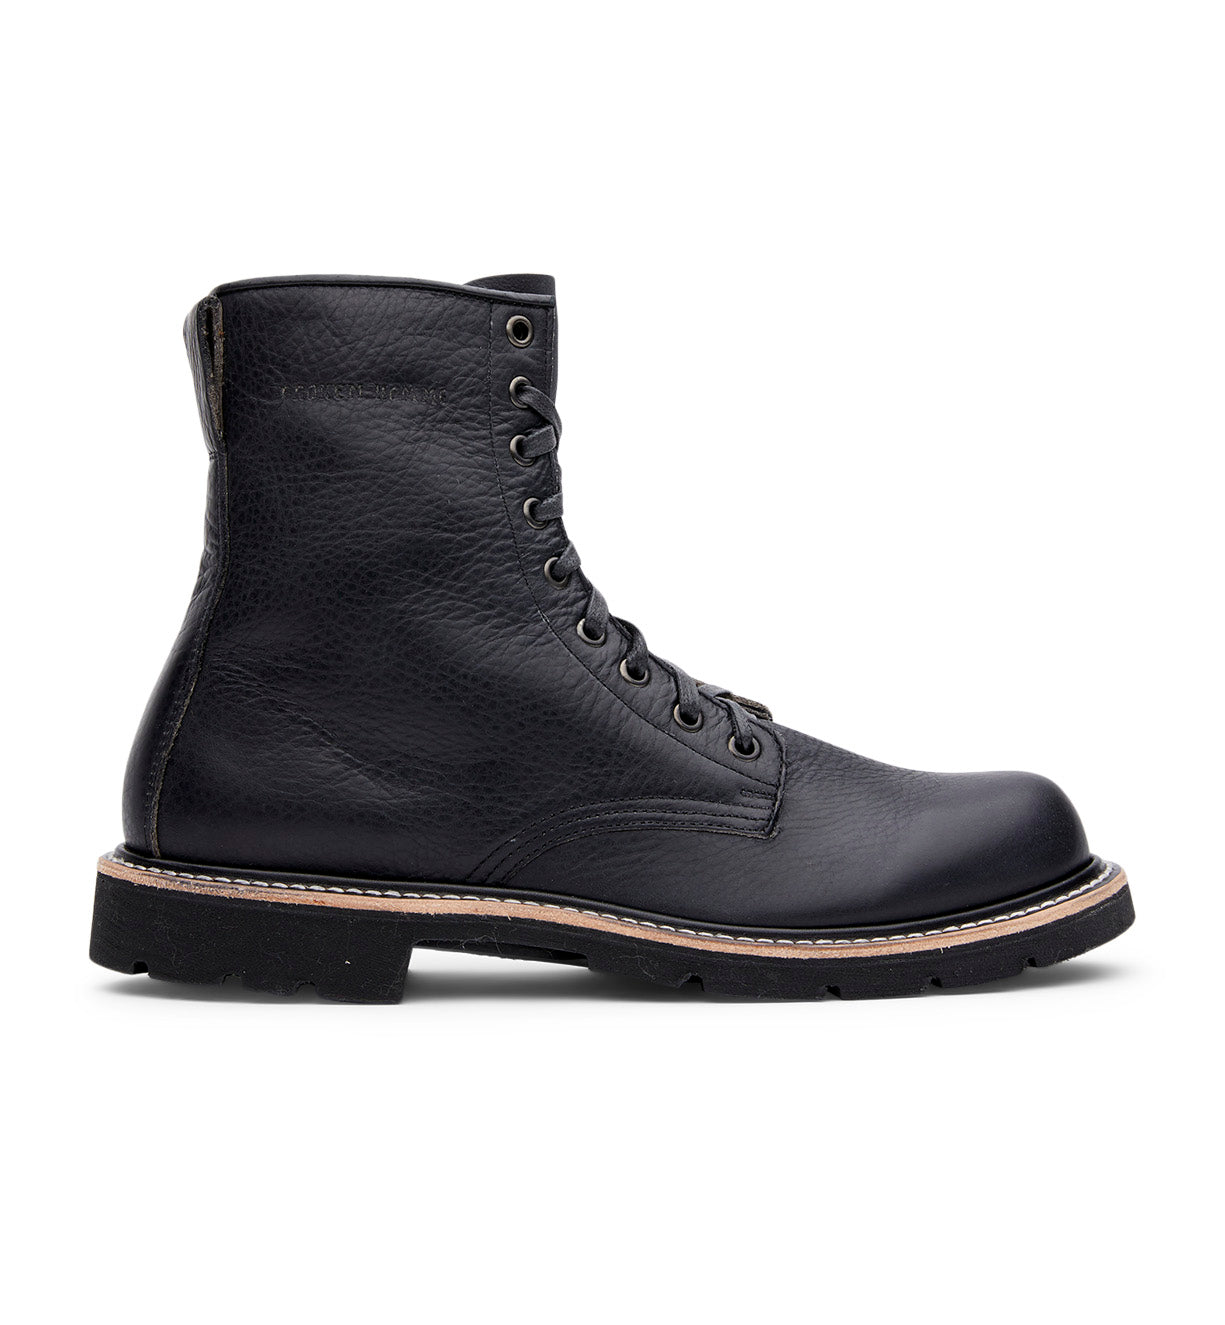 A black leather boot with a rubber sole, made with 360 full grain leather welt called Jacob by Broken Homme.